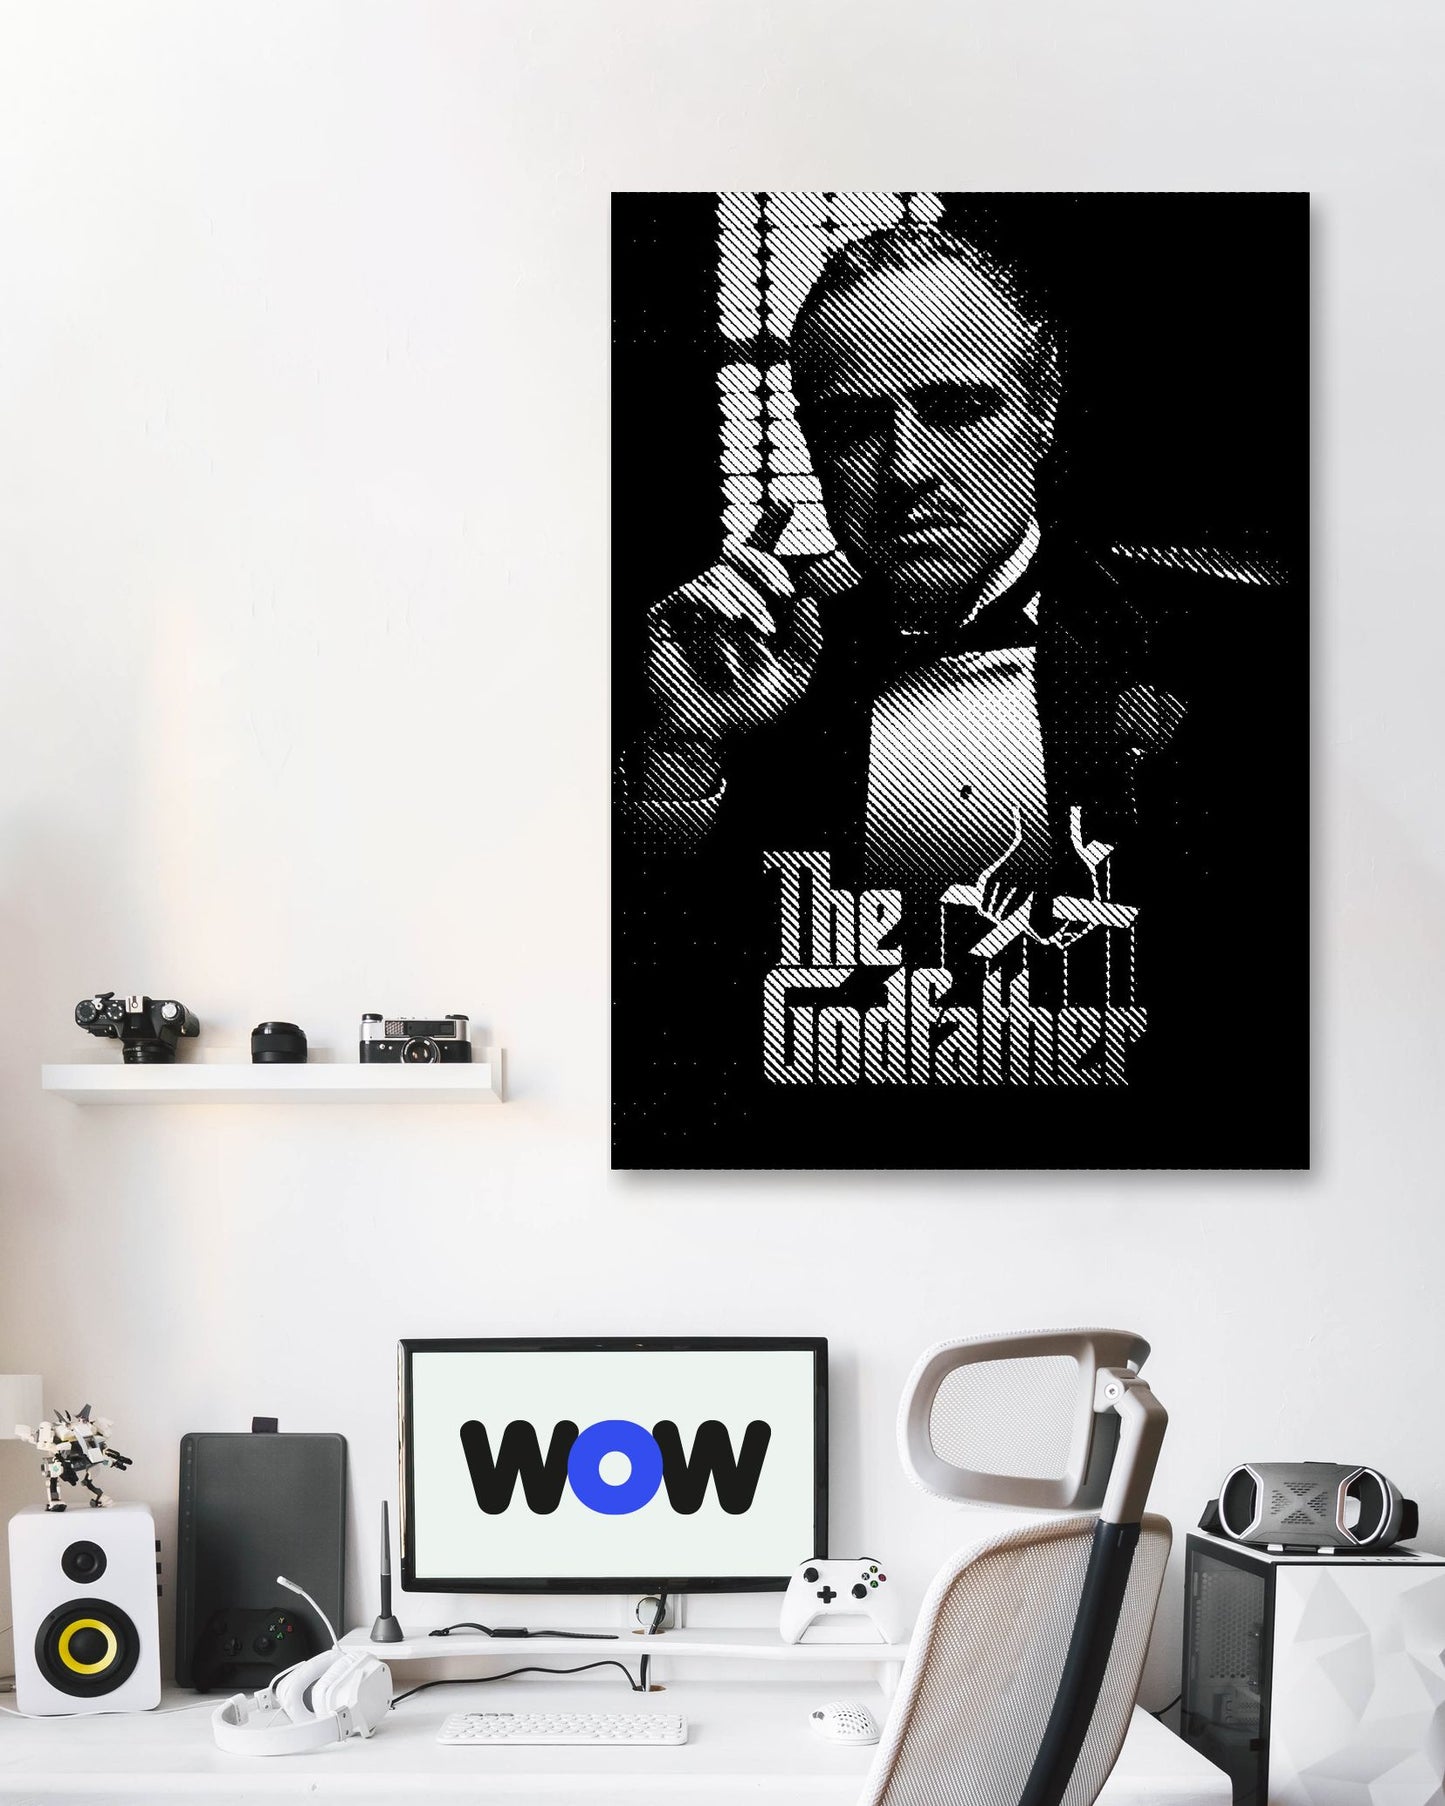 The Godfather - @Vecto